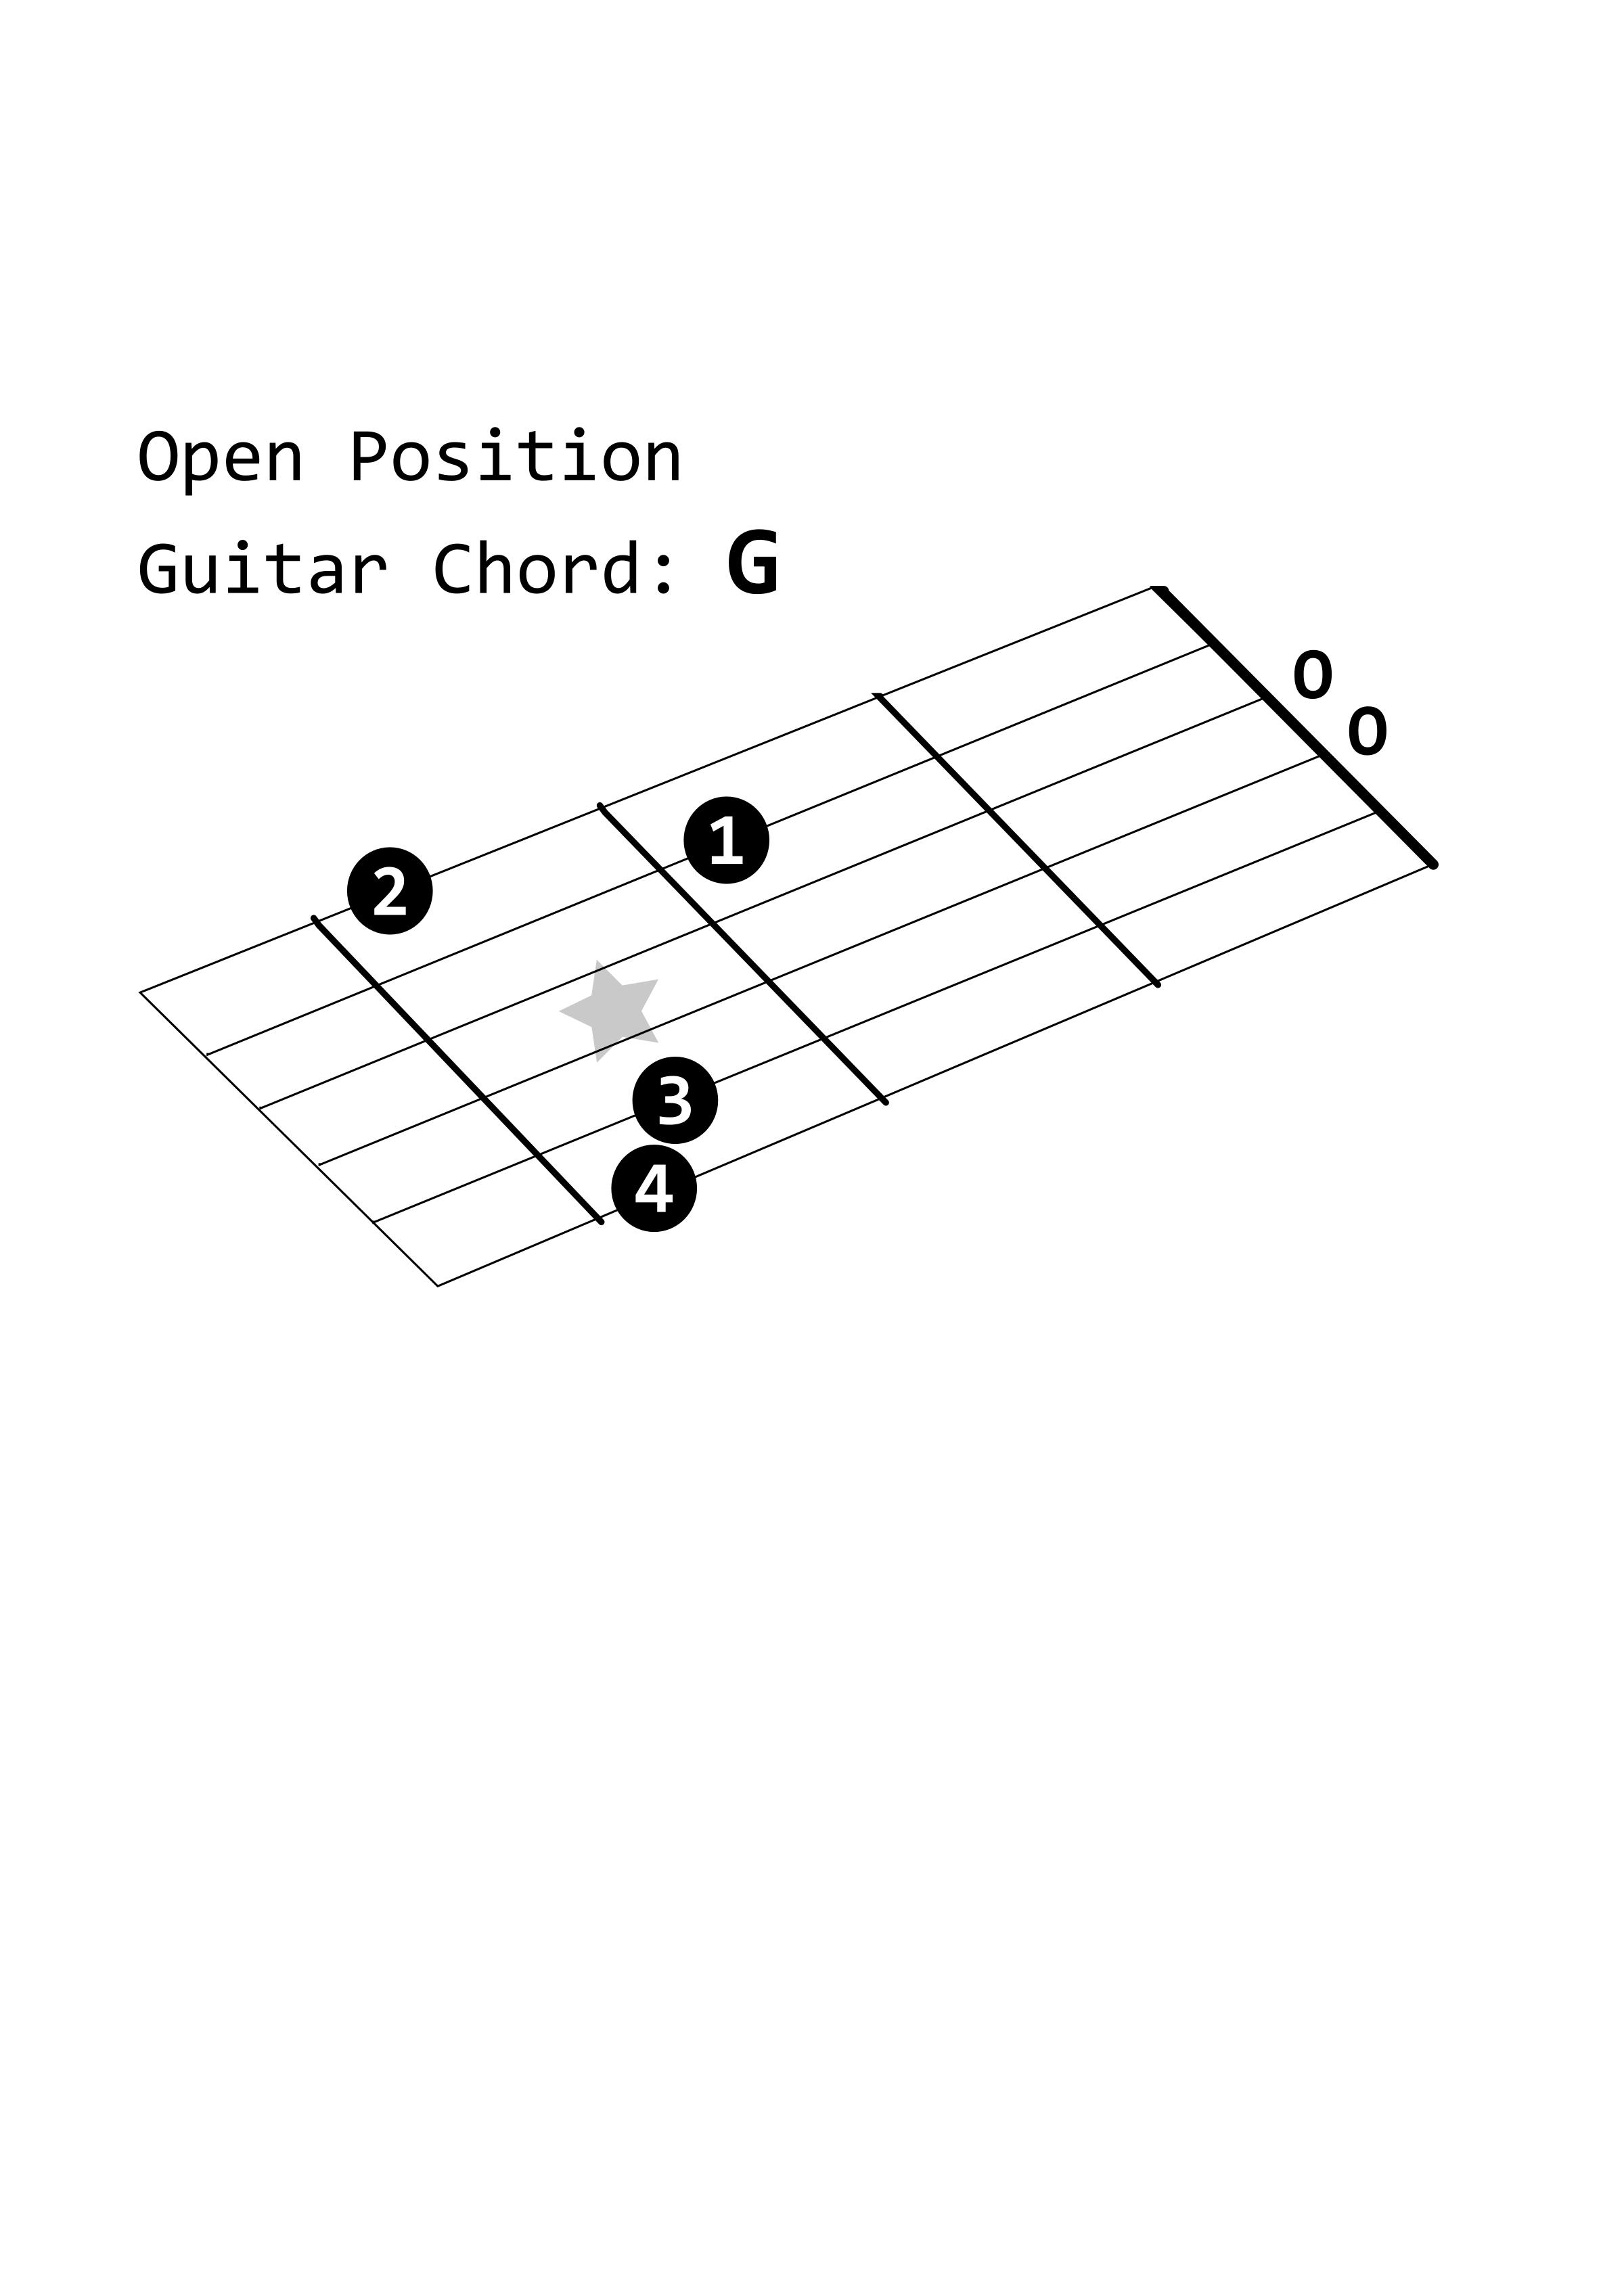 Open Position Guitar Chord PNG icons